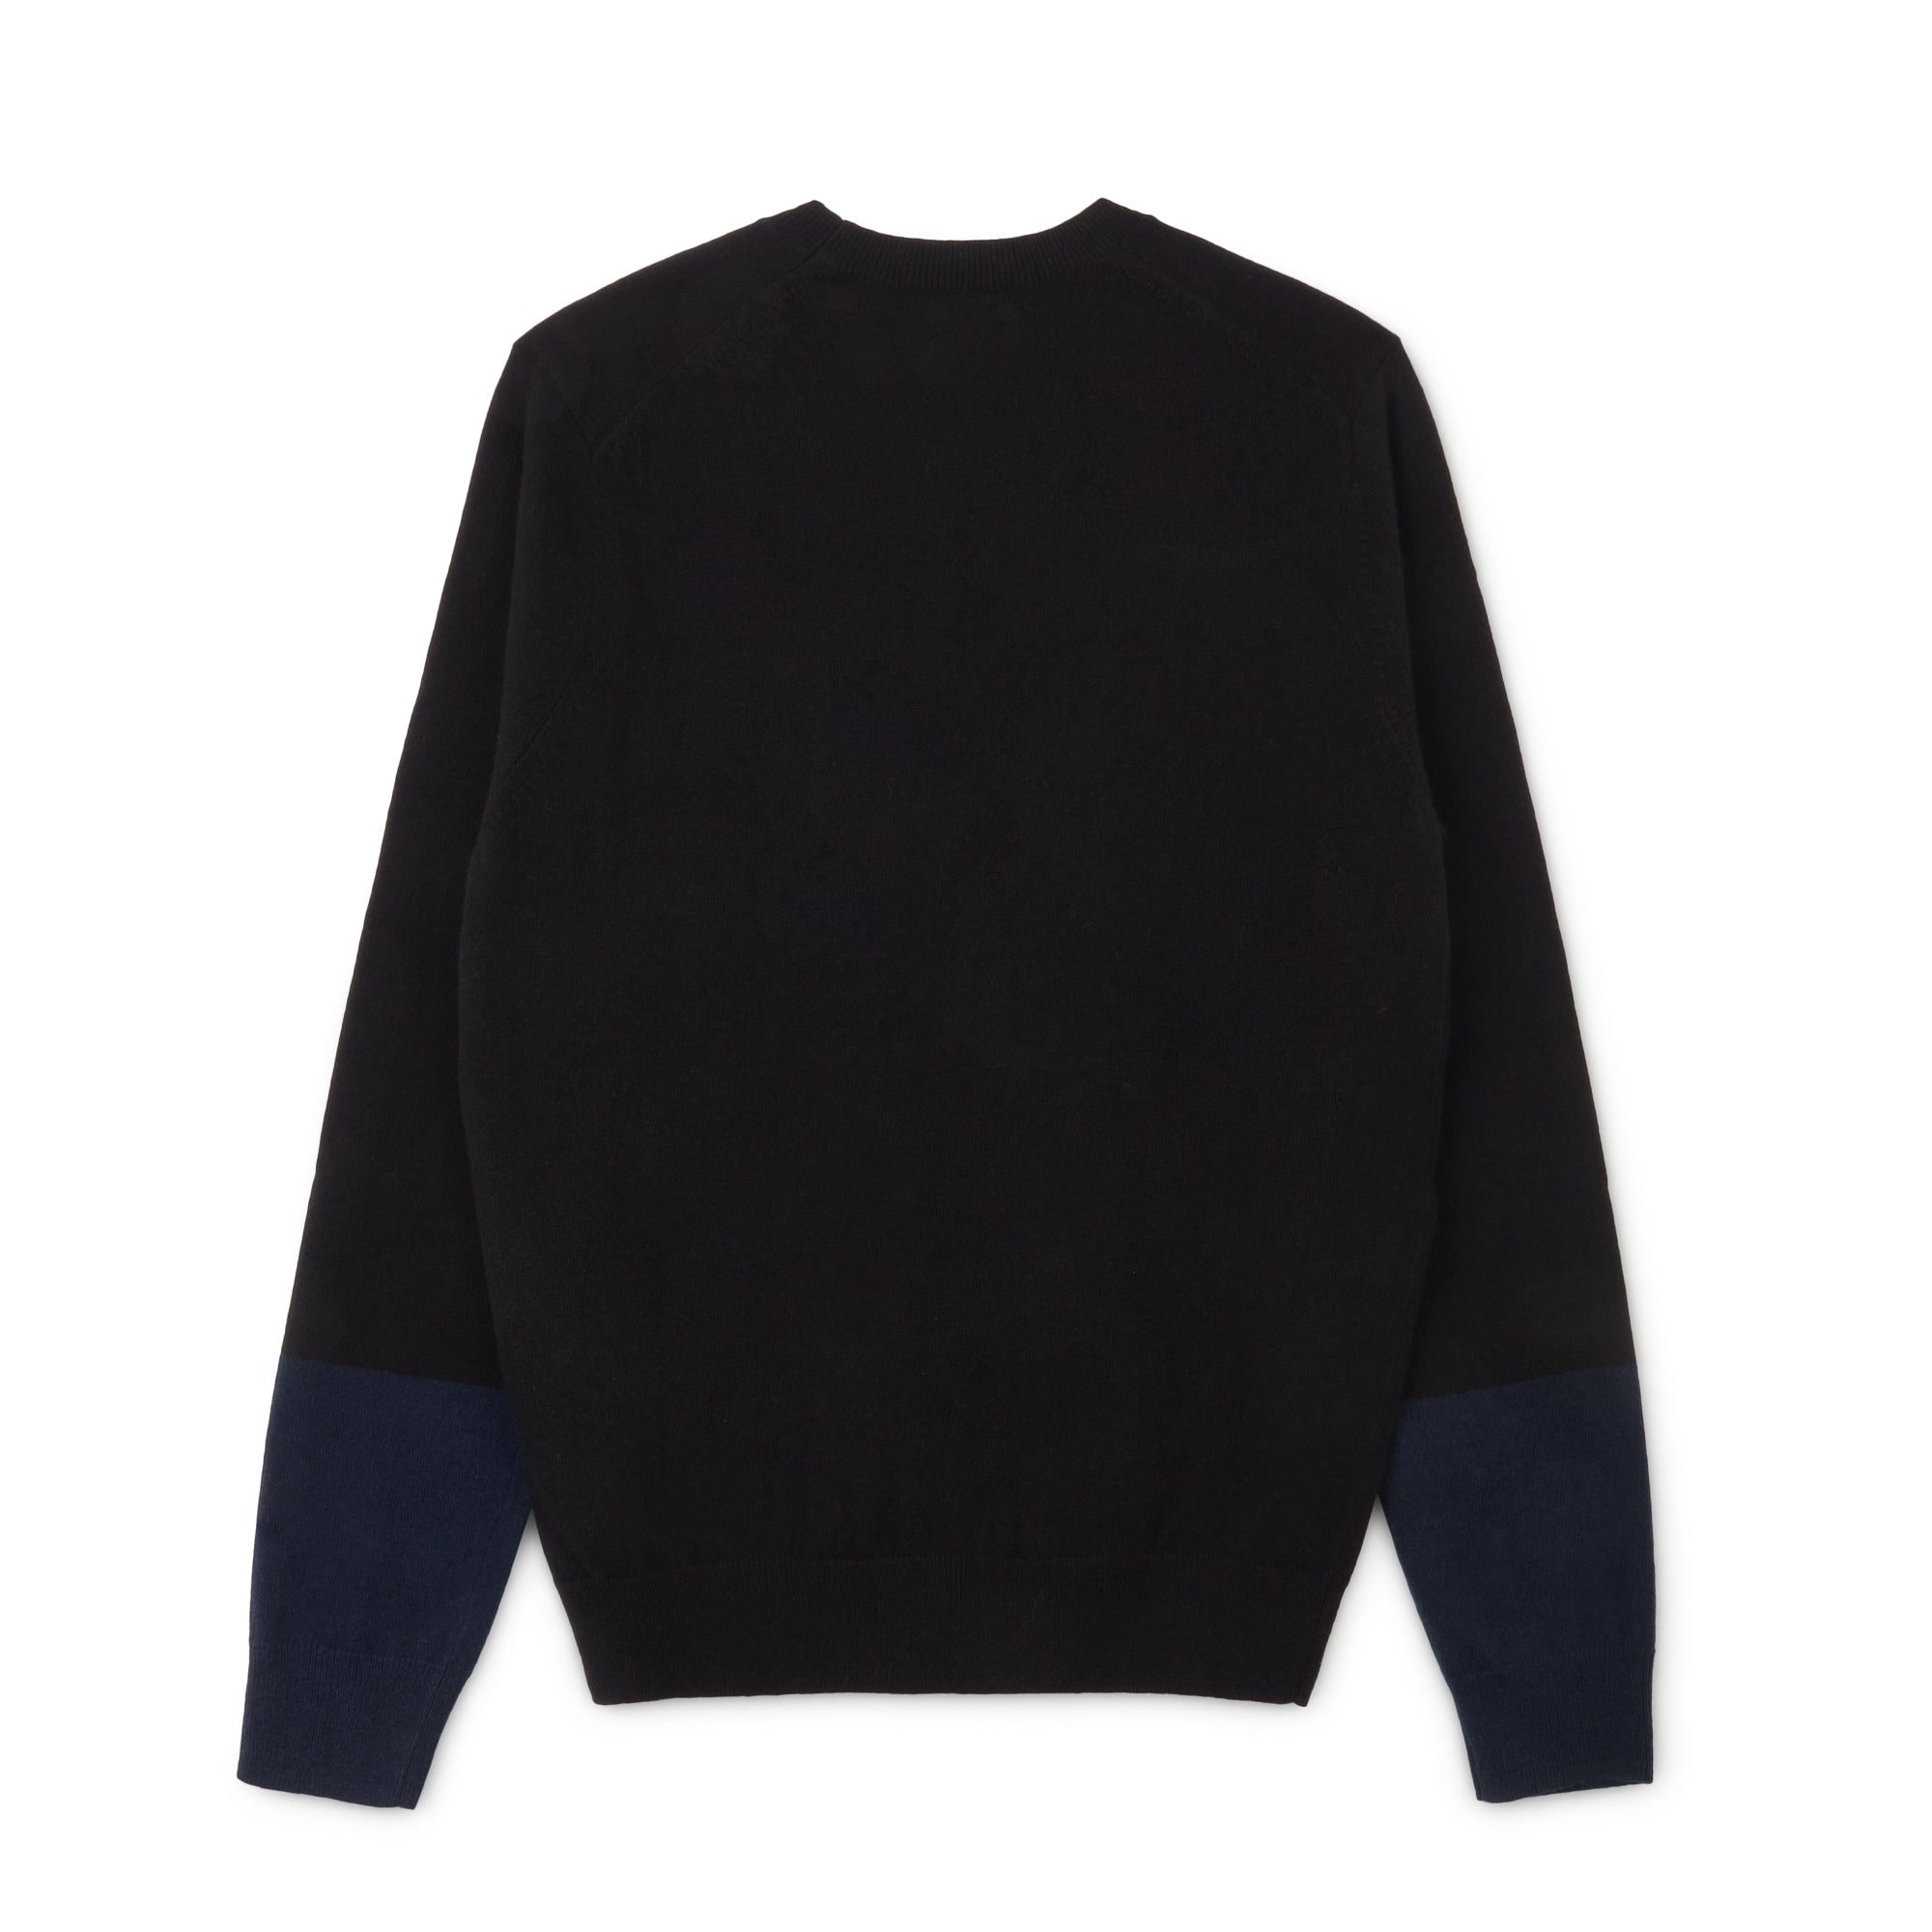 CDG Shirt Forever - Round Neck Contrast Jumper - (Black/Navy) view 2